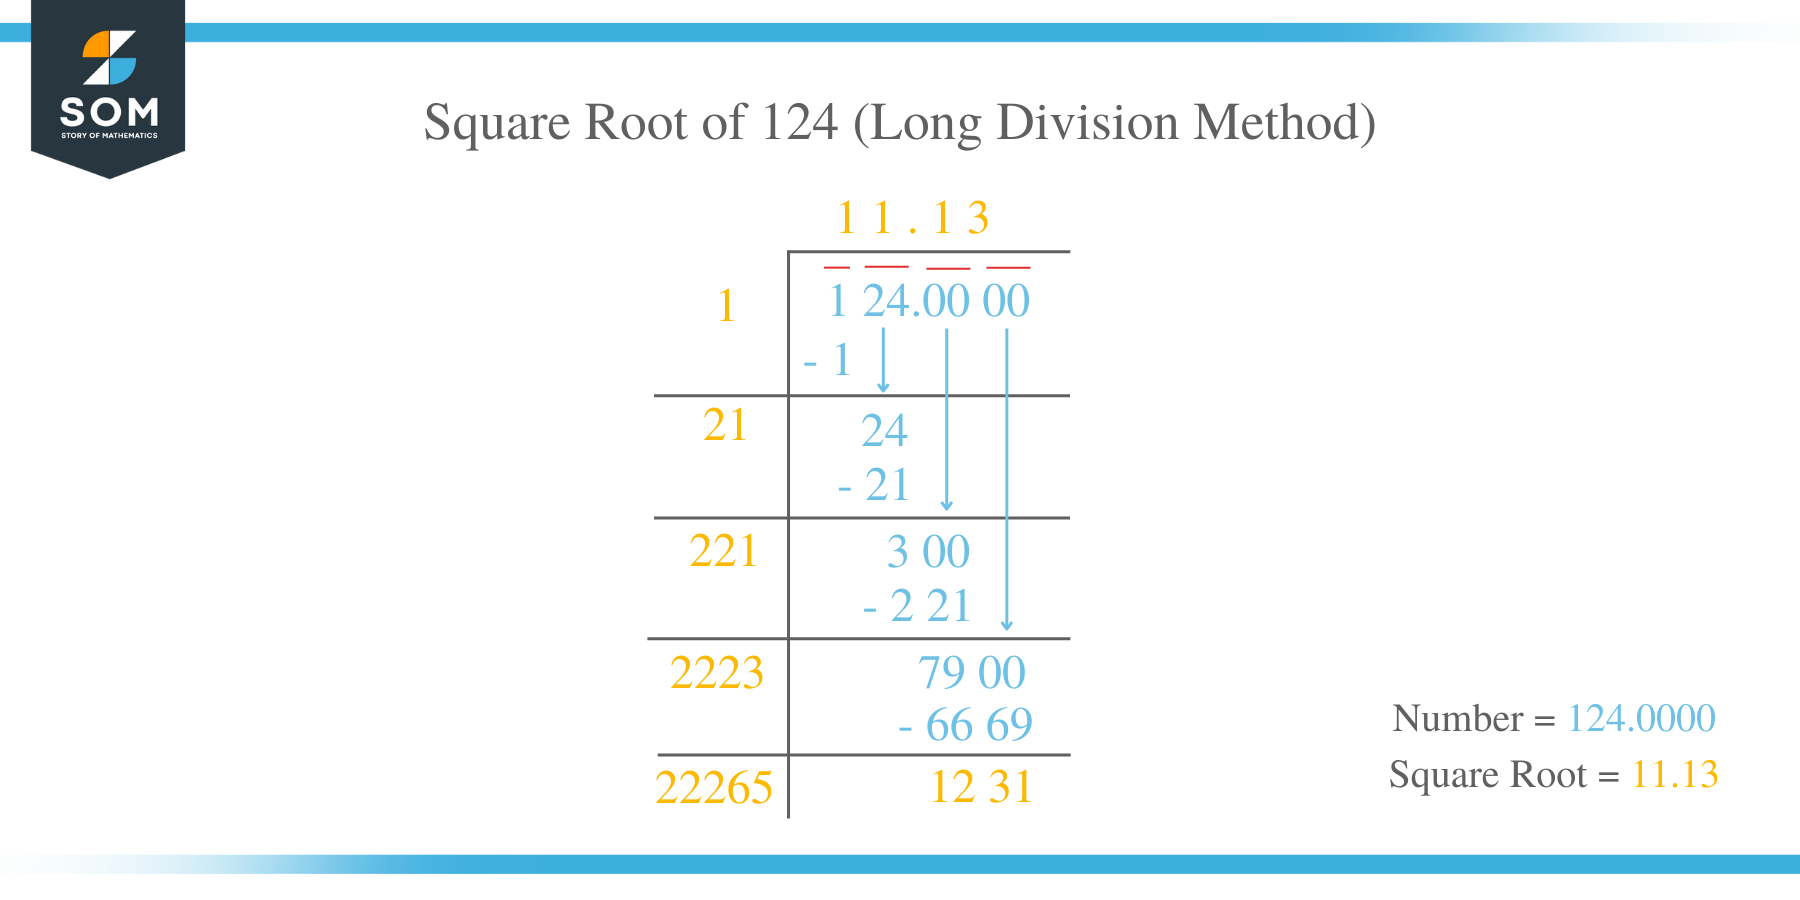 Square Root of 124 by Long Division Method